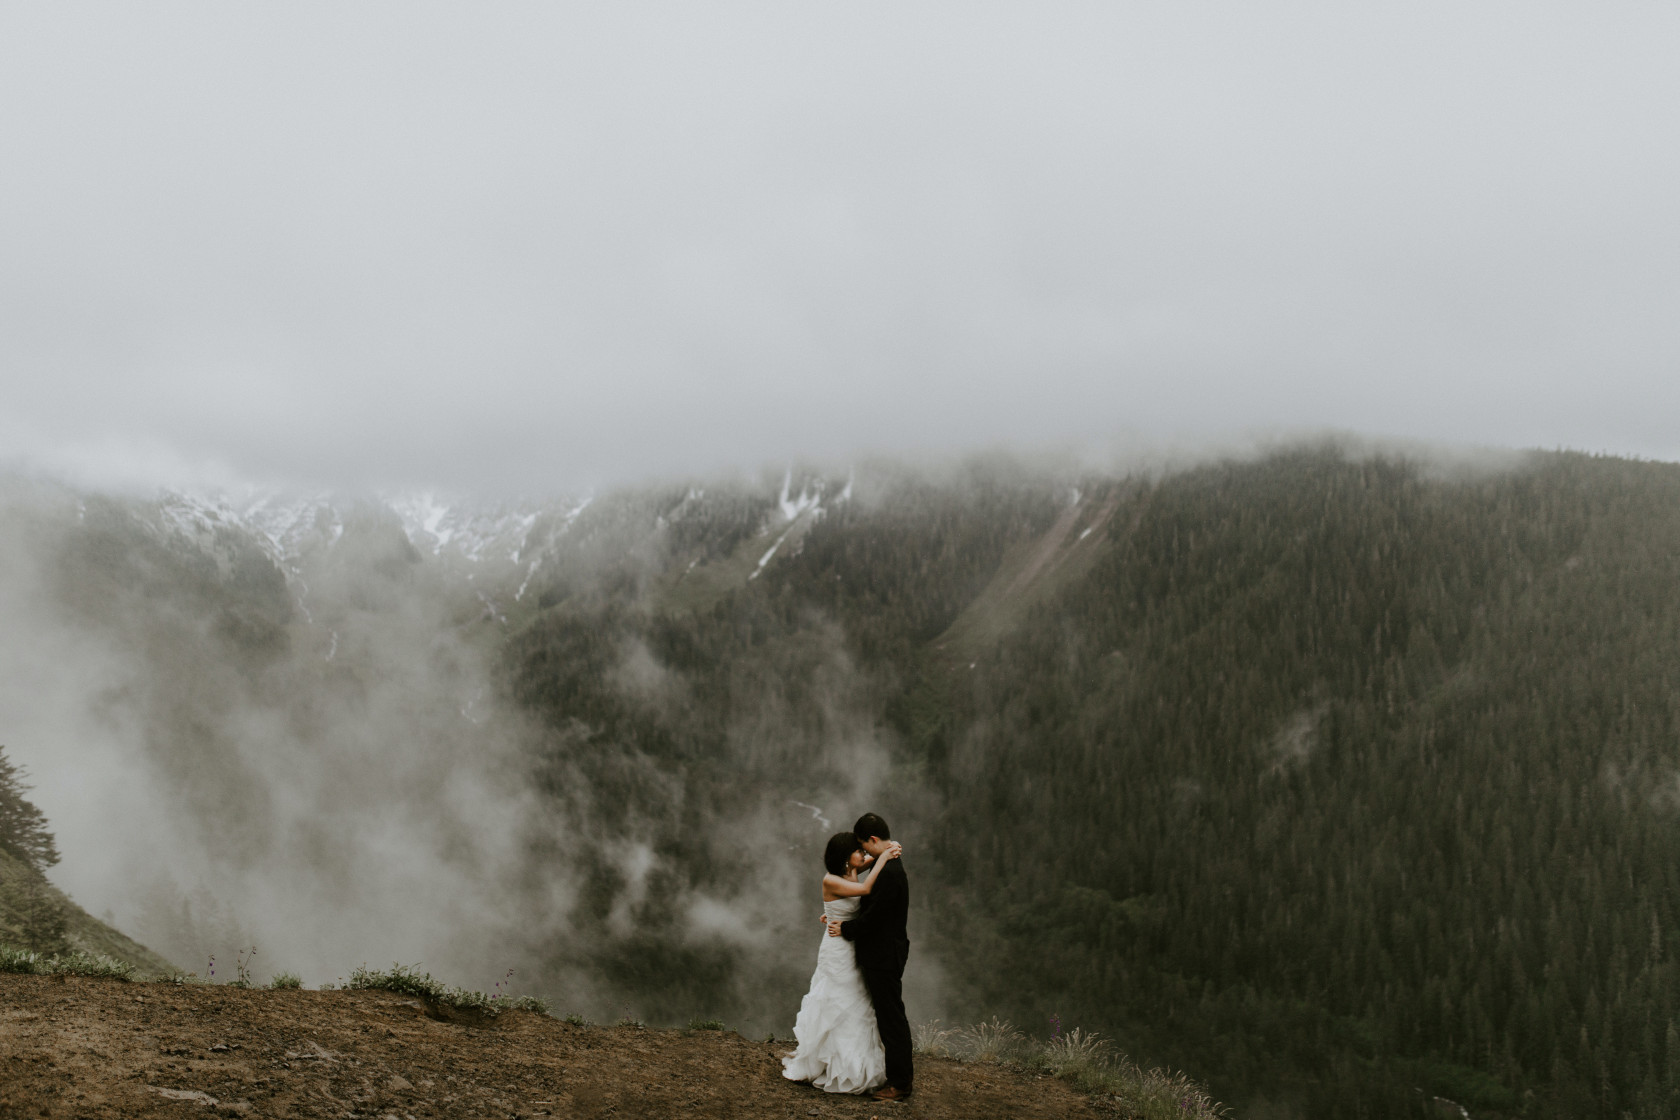 Valerie and Alex hug at Mount Hood. Elopement wedding photography at Mount Hood by Sienna Plus Josh.